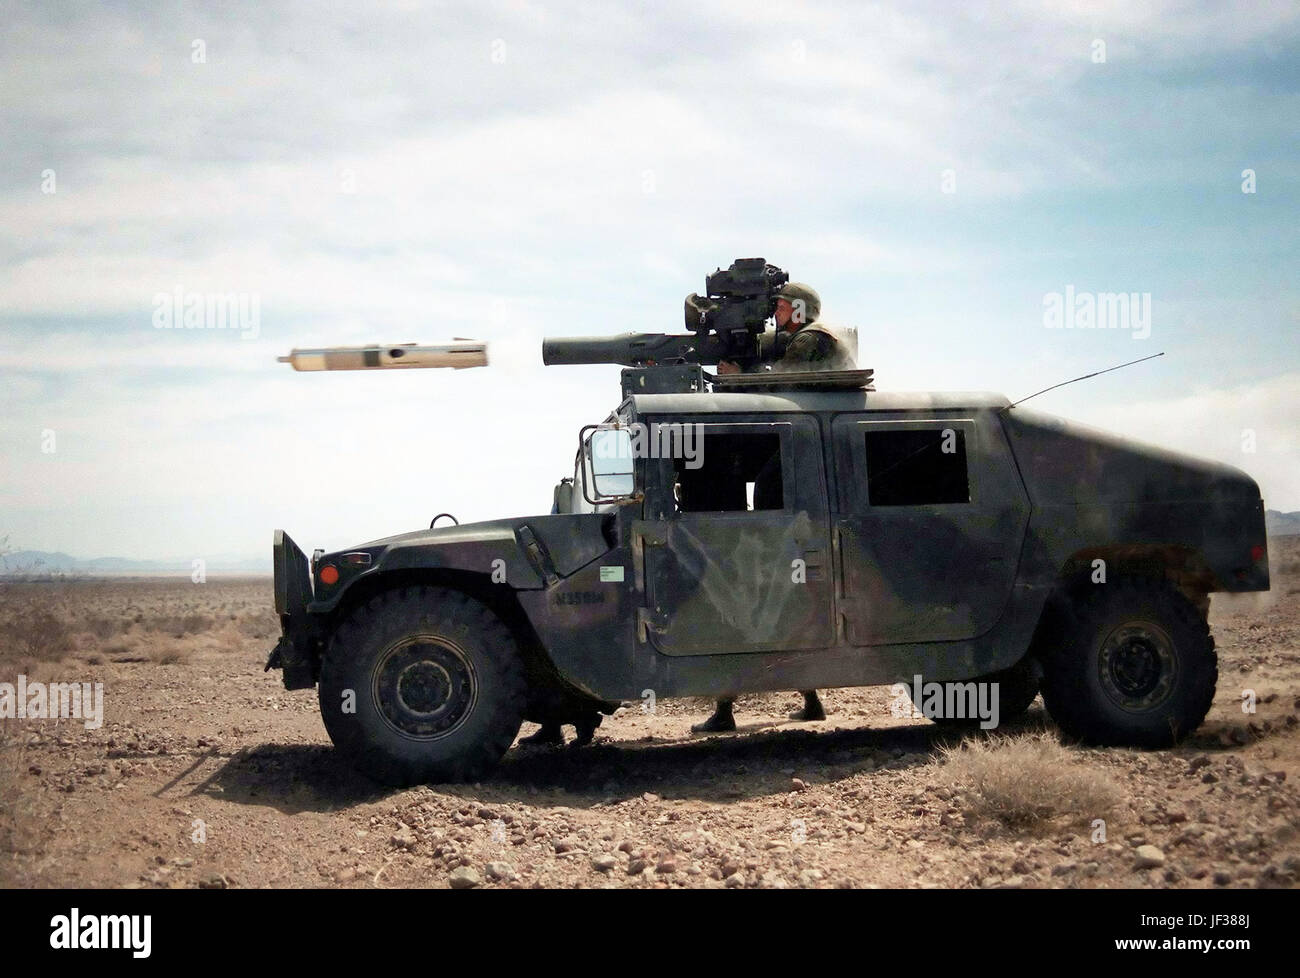 970420-M-8708Y-001 A Tube Launched, Optically Tracked, Wire-guided (TOW) missile hurtles out of its launcher mounted on a U.S. Marine Corps Humvee at the Marine Corps Air Ground Combat Center, Twentynine Palms, Calif., during Combined Arms Exercise 5-97, on April 20, 1997.  The Marine Air Ground Task Force exercise is allowing these Marines of the TOW platoon, Weapons Company, 3rd Battalion, 2nd Marine Regiment, to practice their desert warfare at the Twentynine Palms Lead Mountain Range.  DoD photo by Lance Cpl. E.J. Young, U.S. Marine Corps. Stock Photo